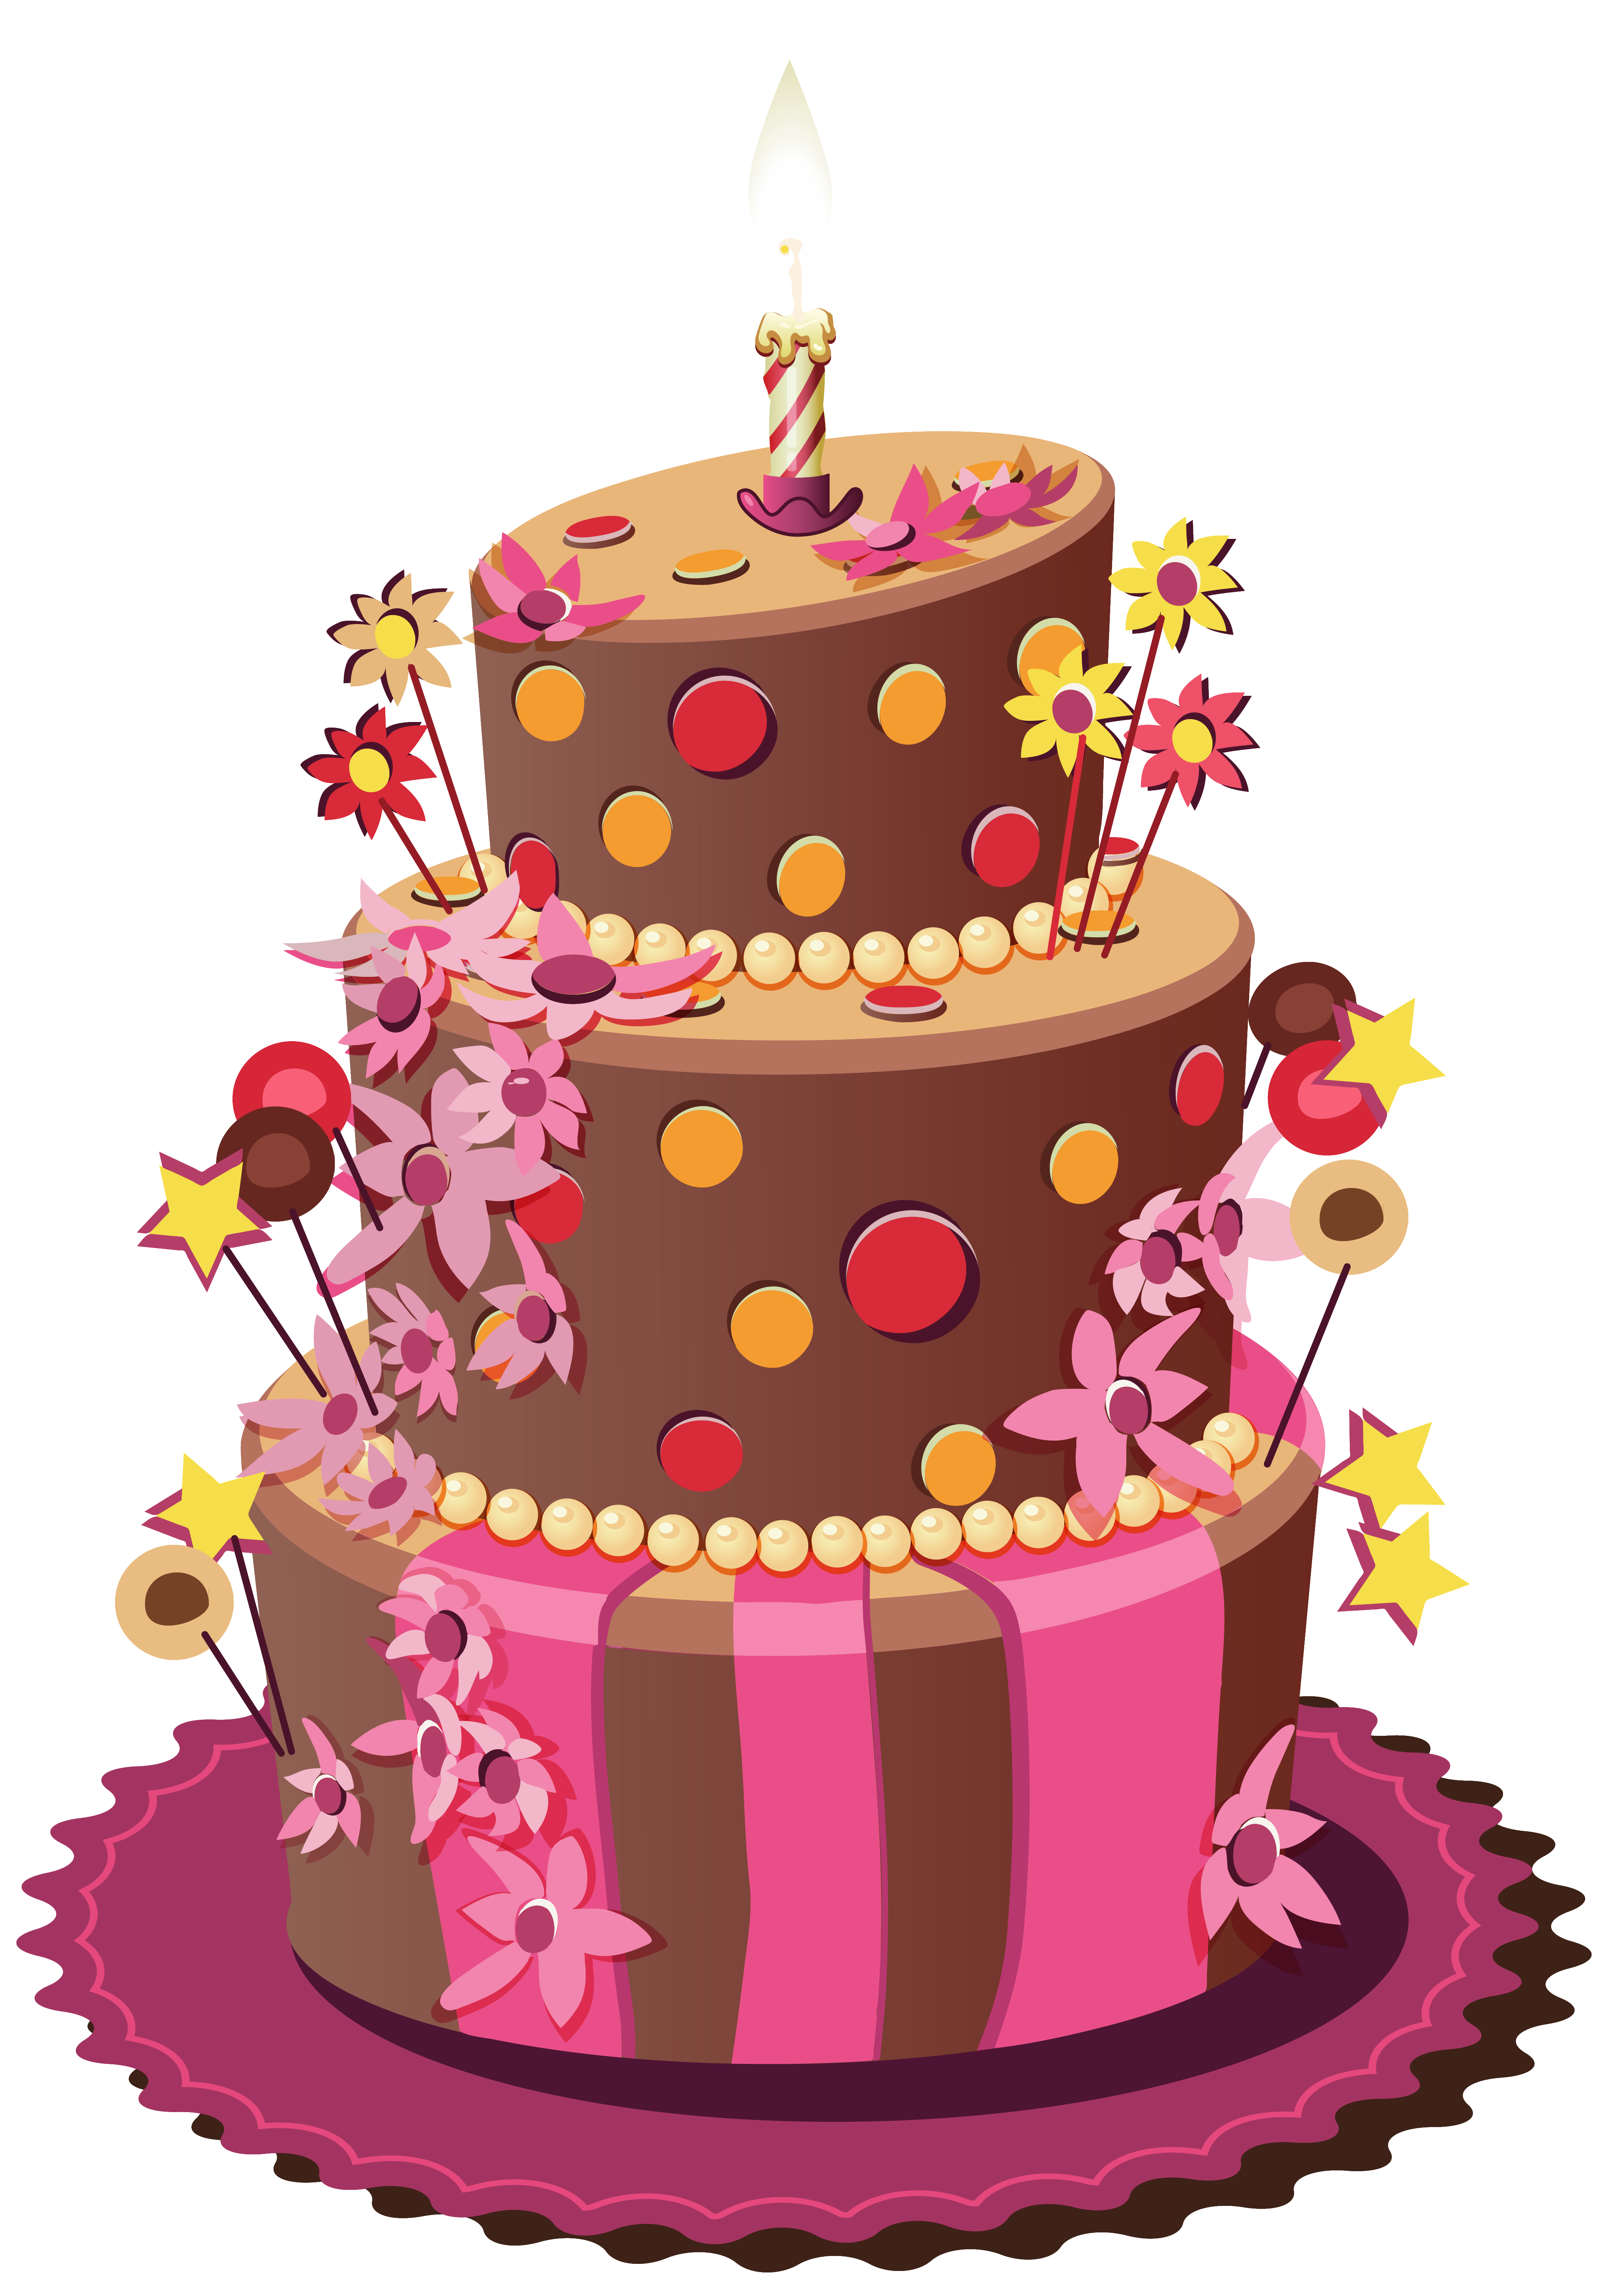 Birthday Cake Png Free Download - Photo #256 - PngFile.net | Free PNG  Images Download